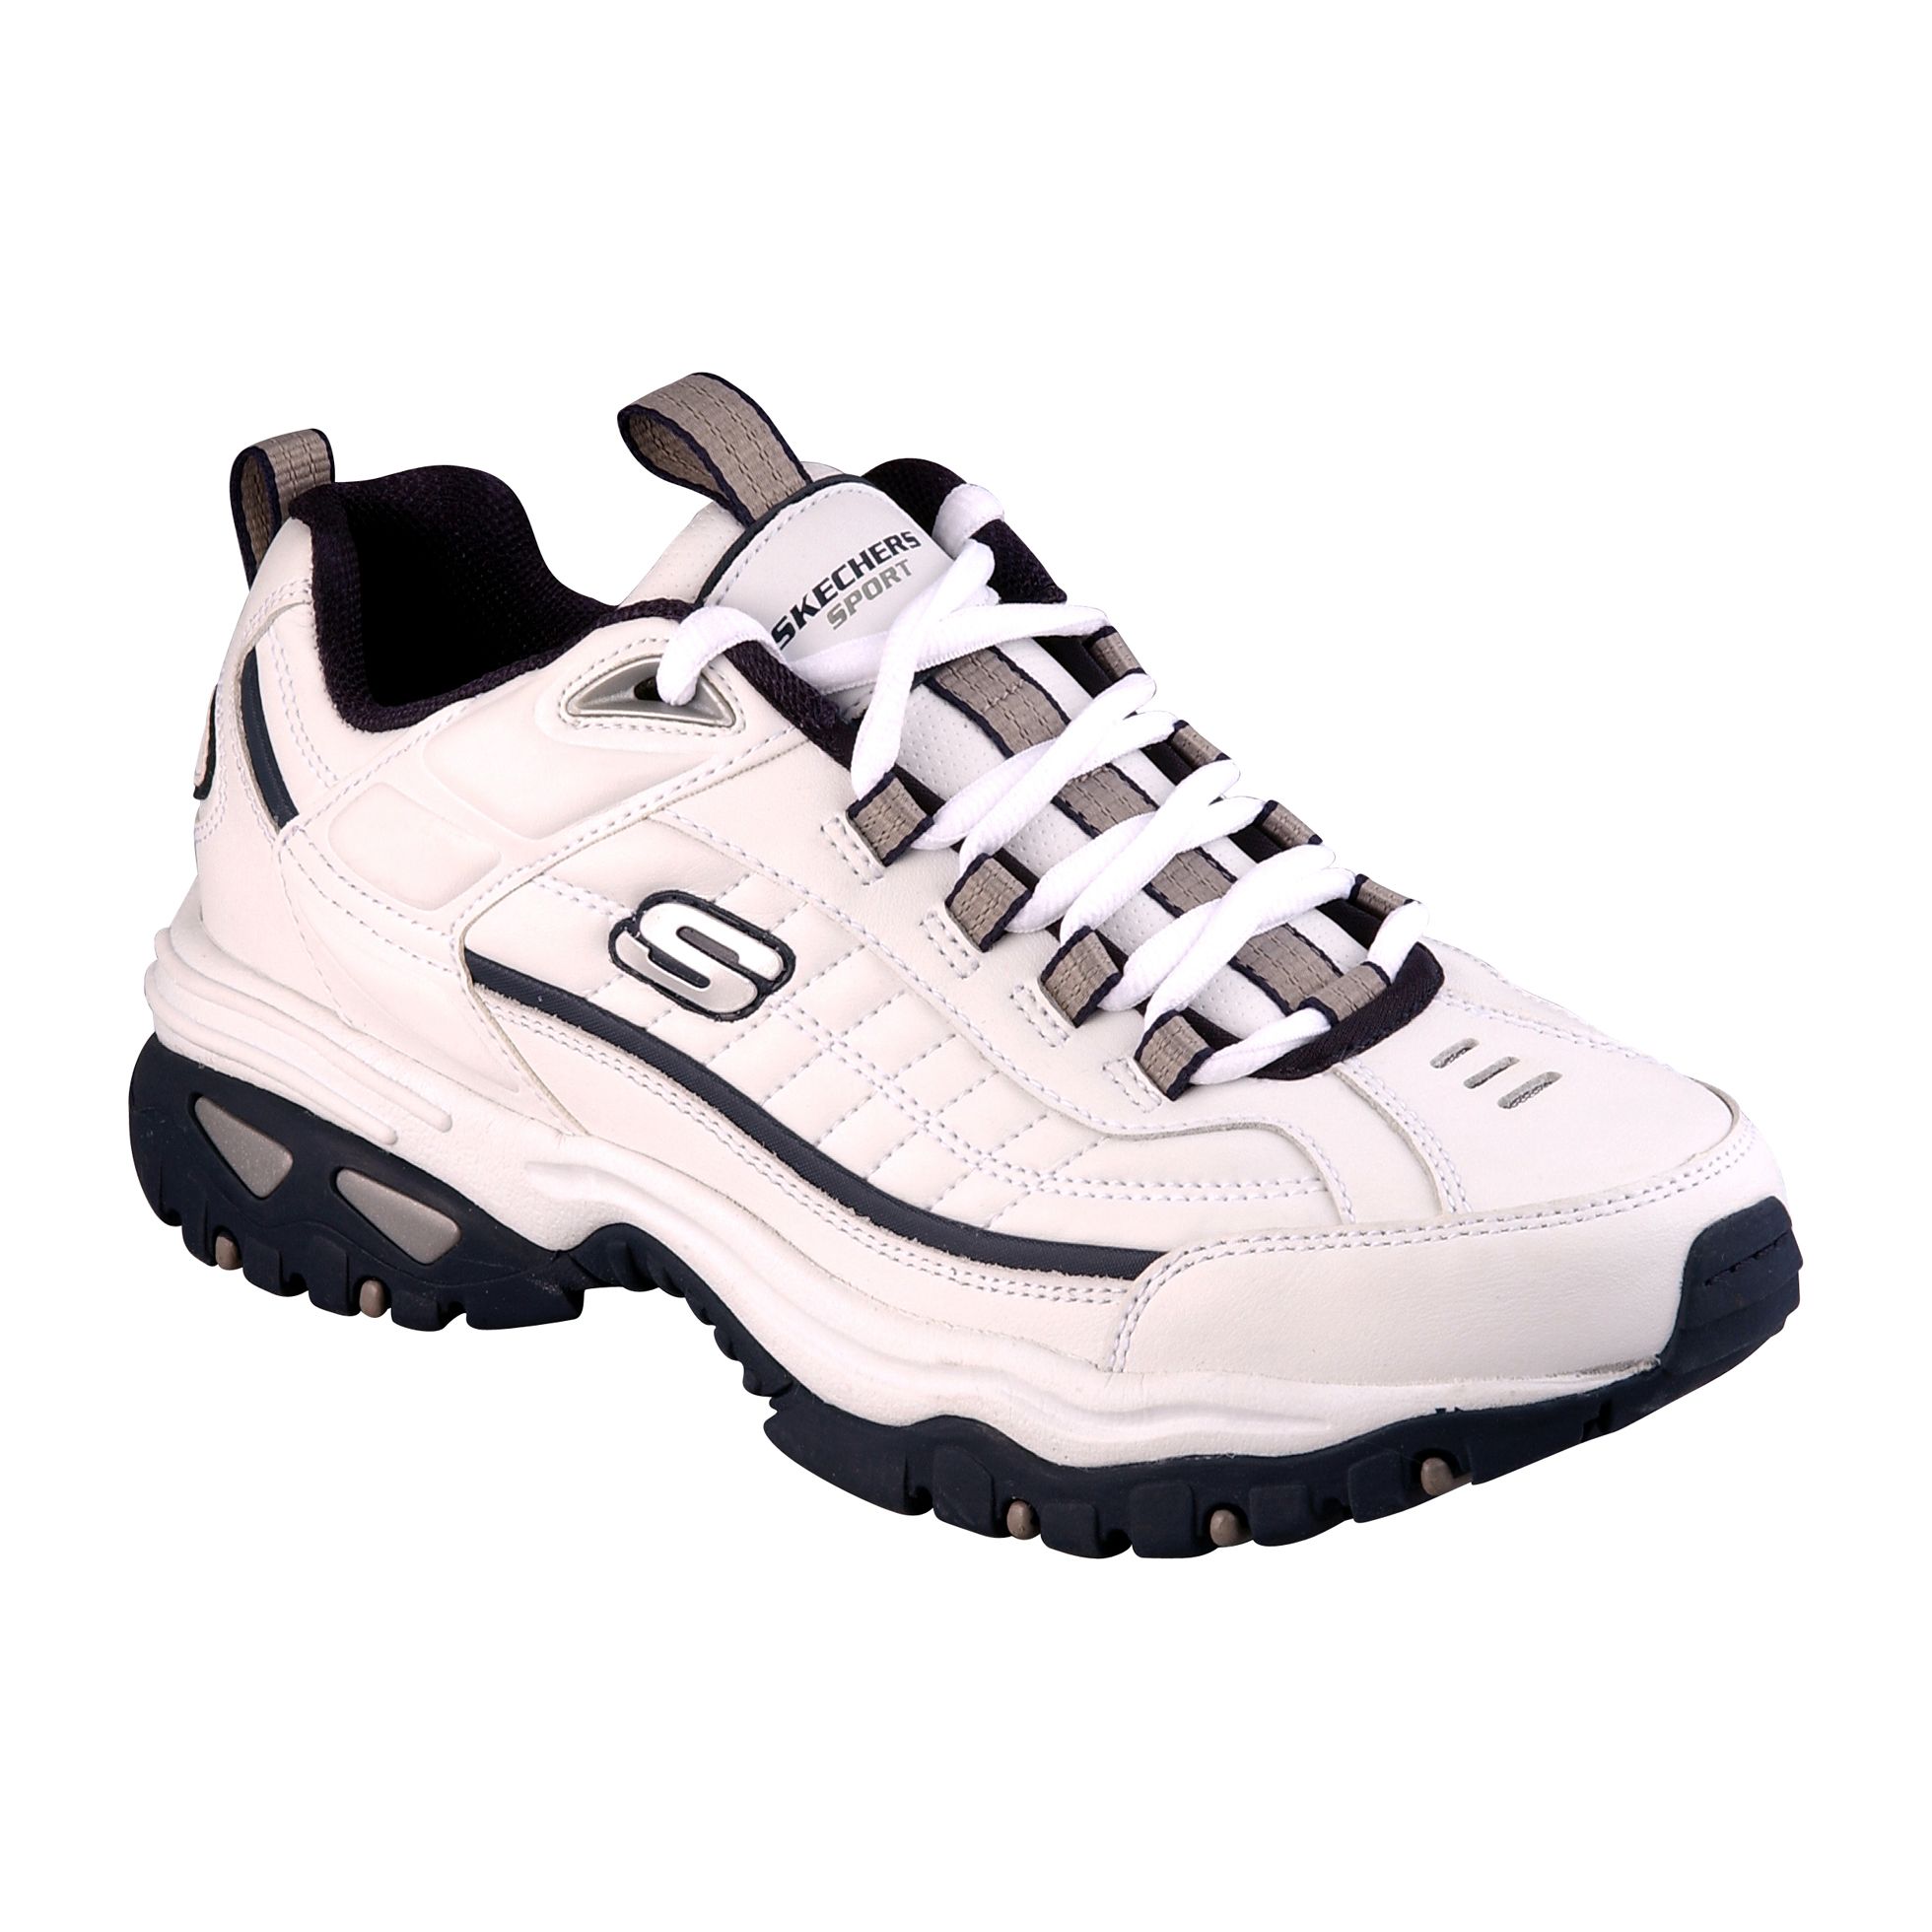 Men's Afterburn Casual Athletic Shoe - White/Navy Wide Width Avaliable